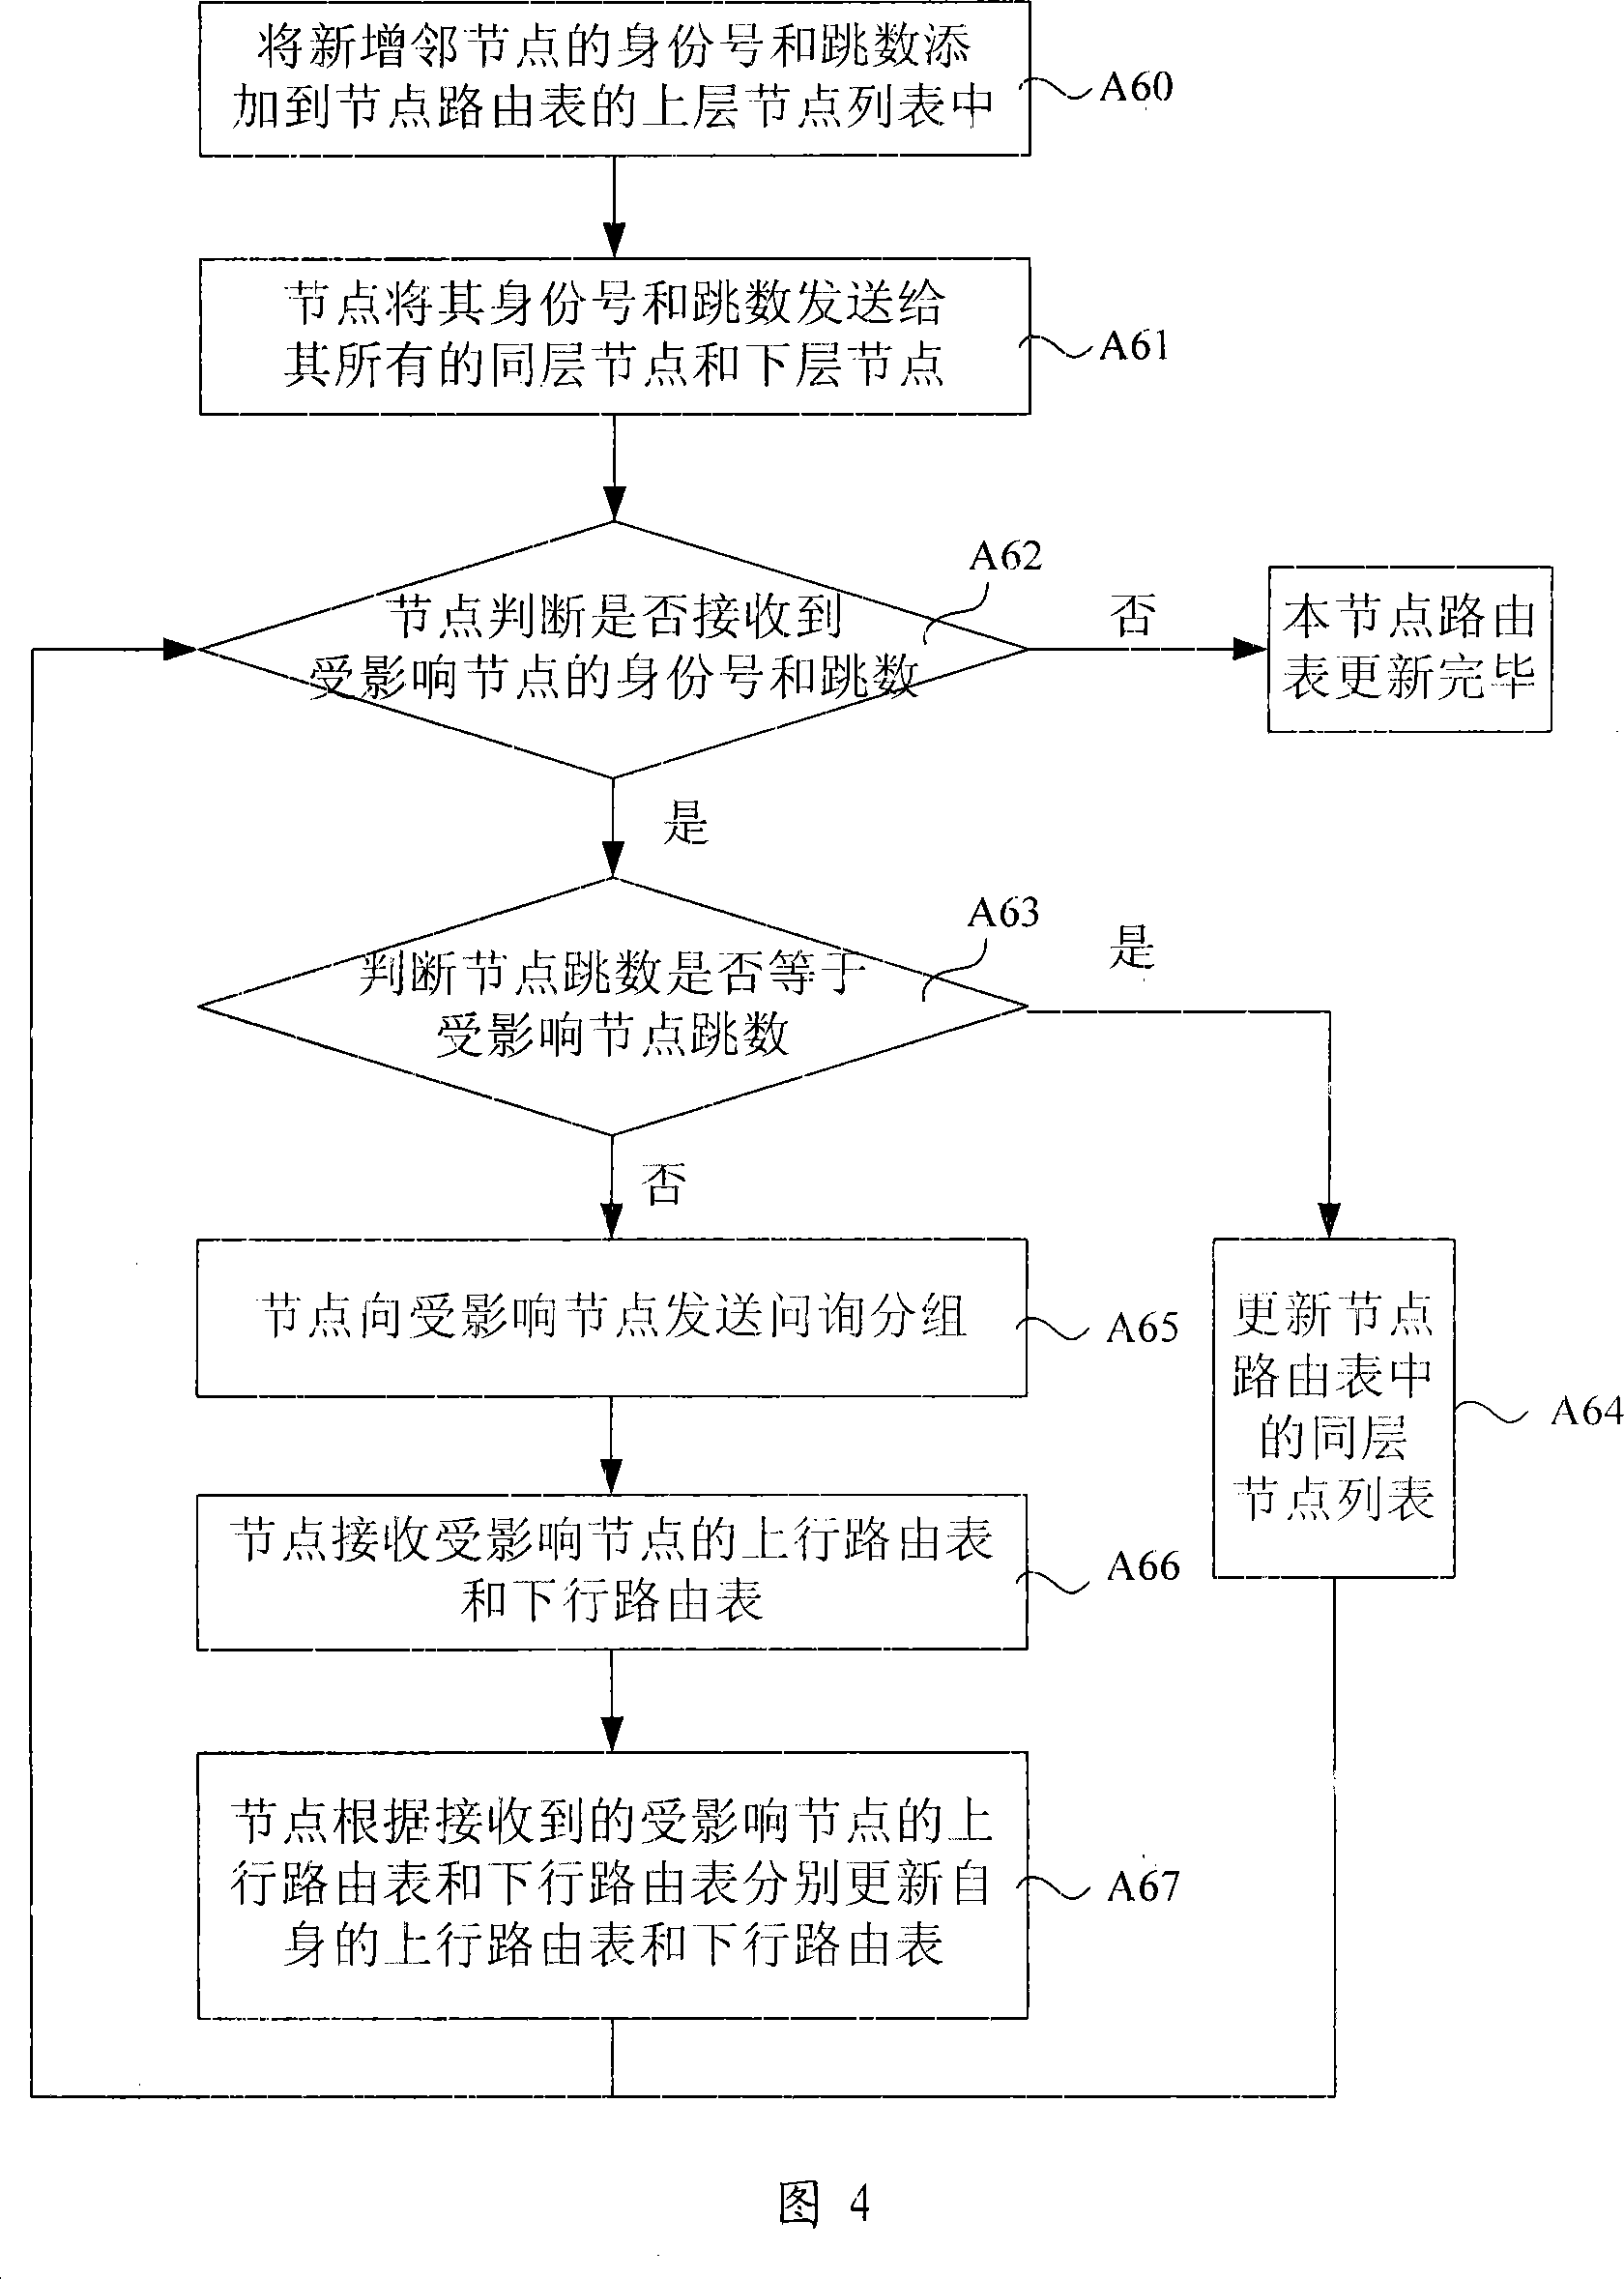 A routing update method